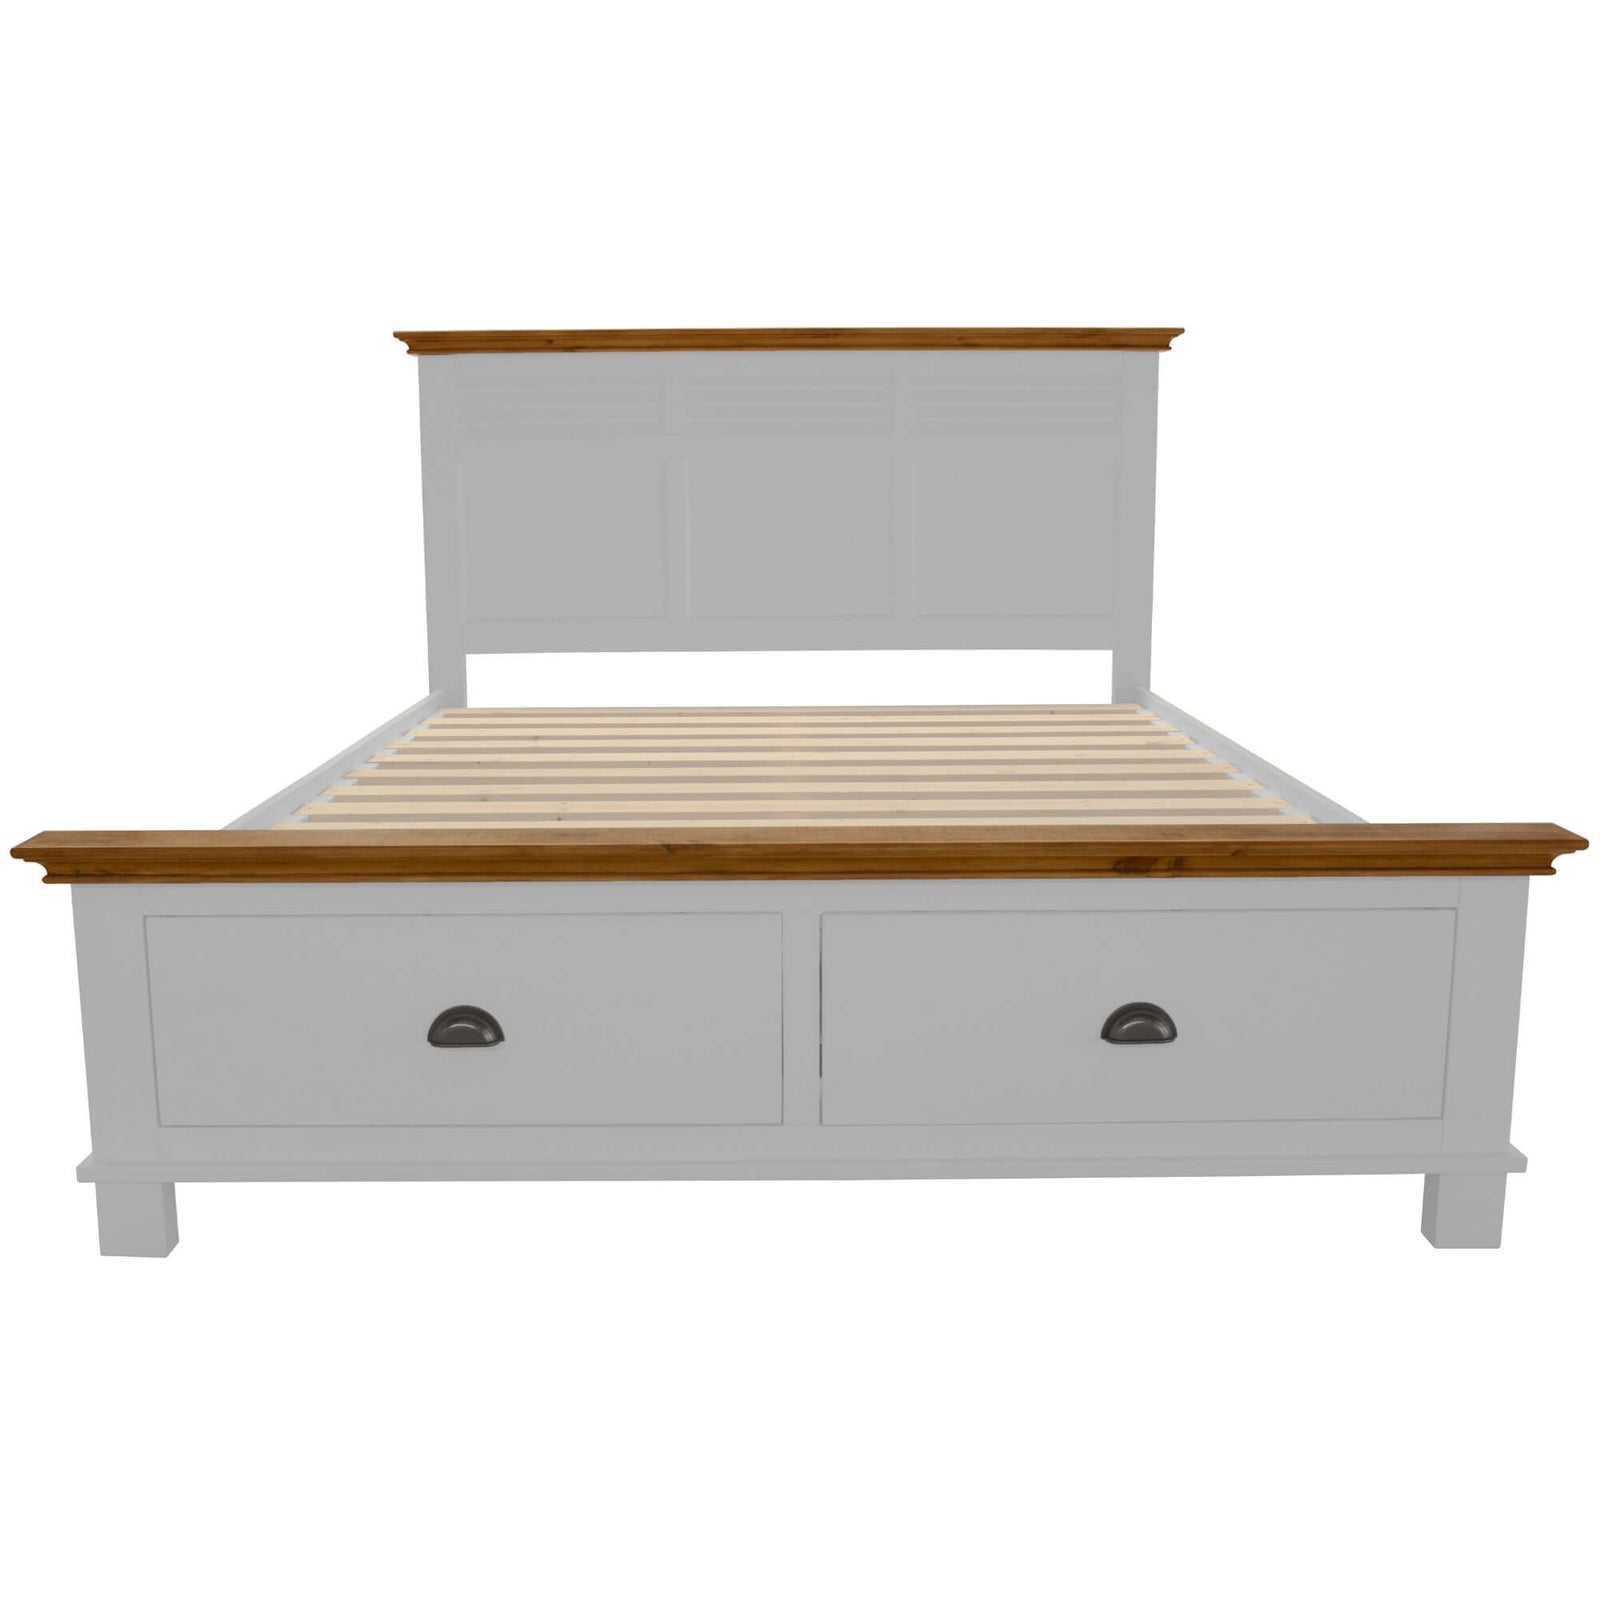 Virginia King Bed Frame Size Mattress Base with Drawer Solid Pine Wood - White-Upinteriors